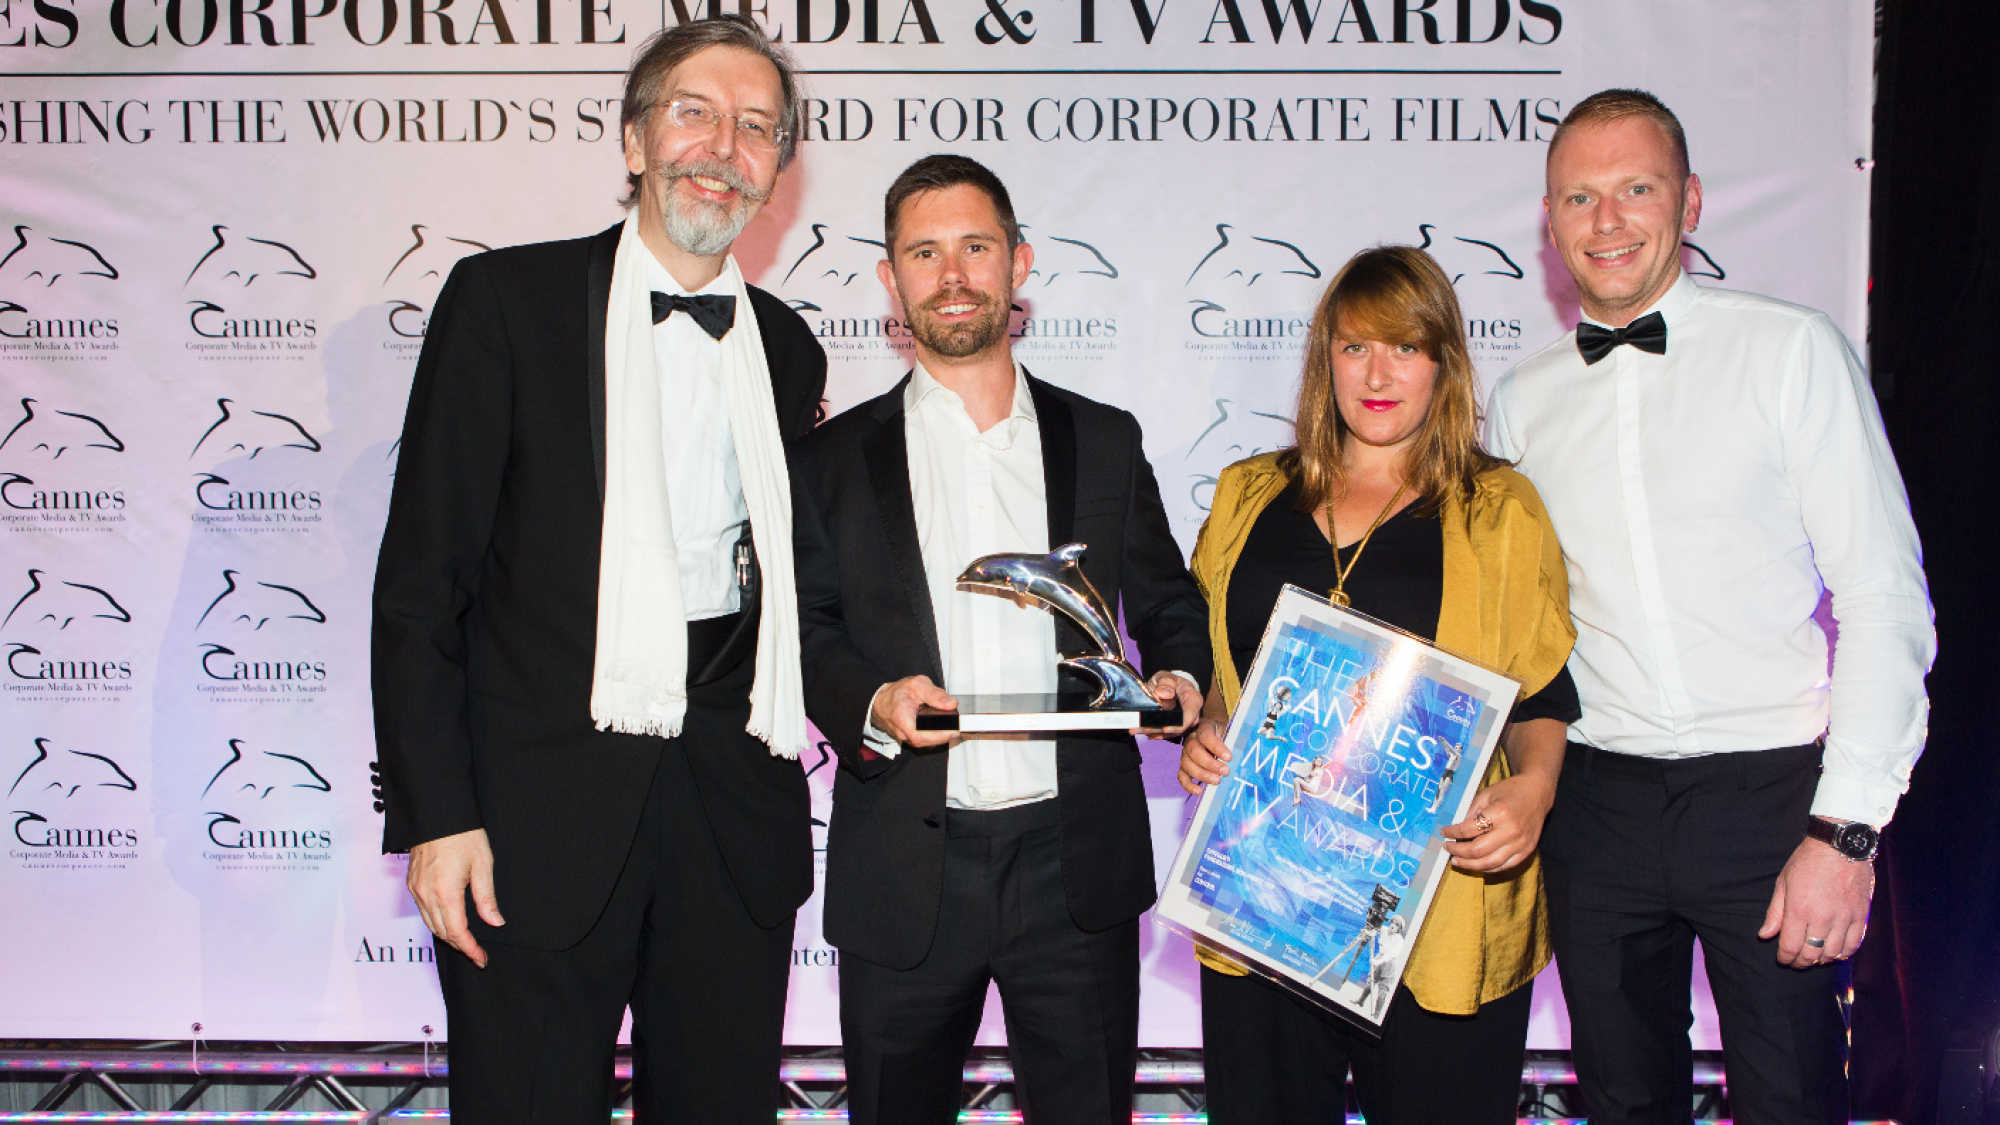 Creative agency Raw London win Silver Dolphin at Cannes